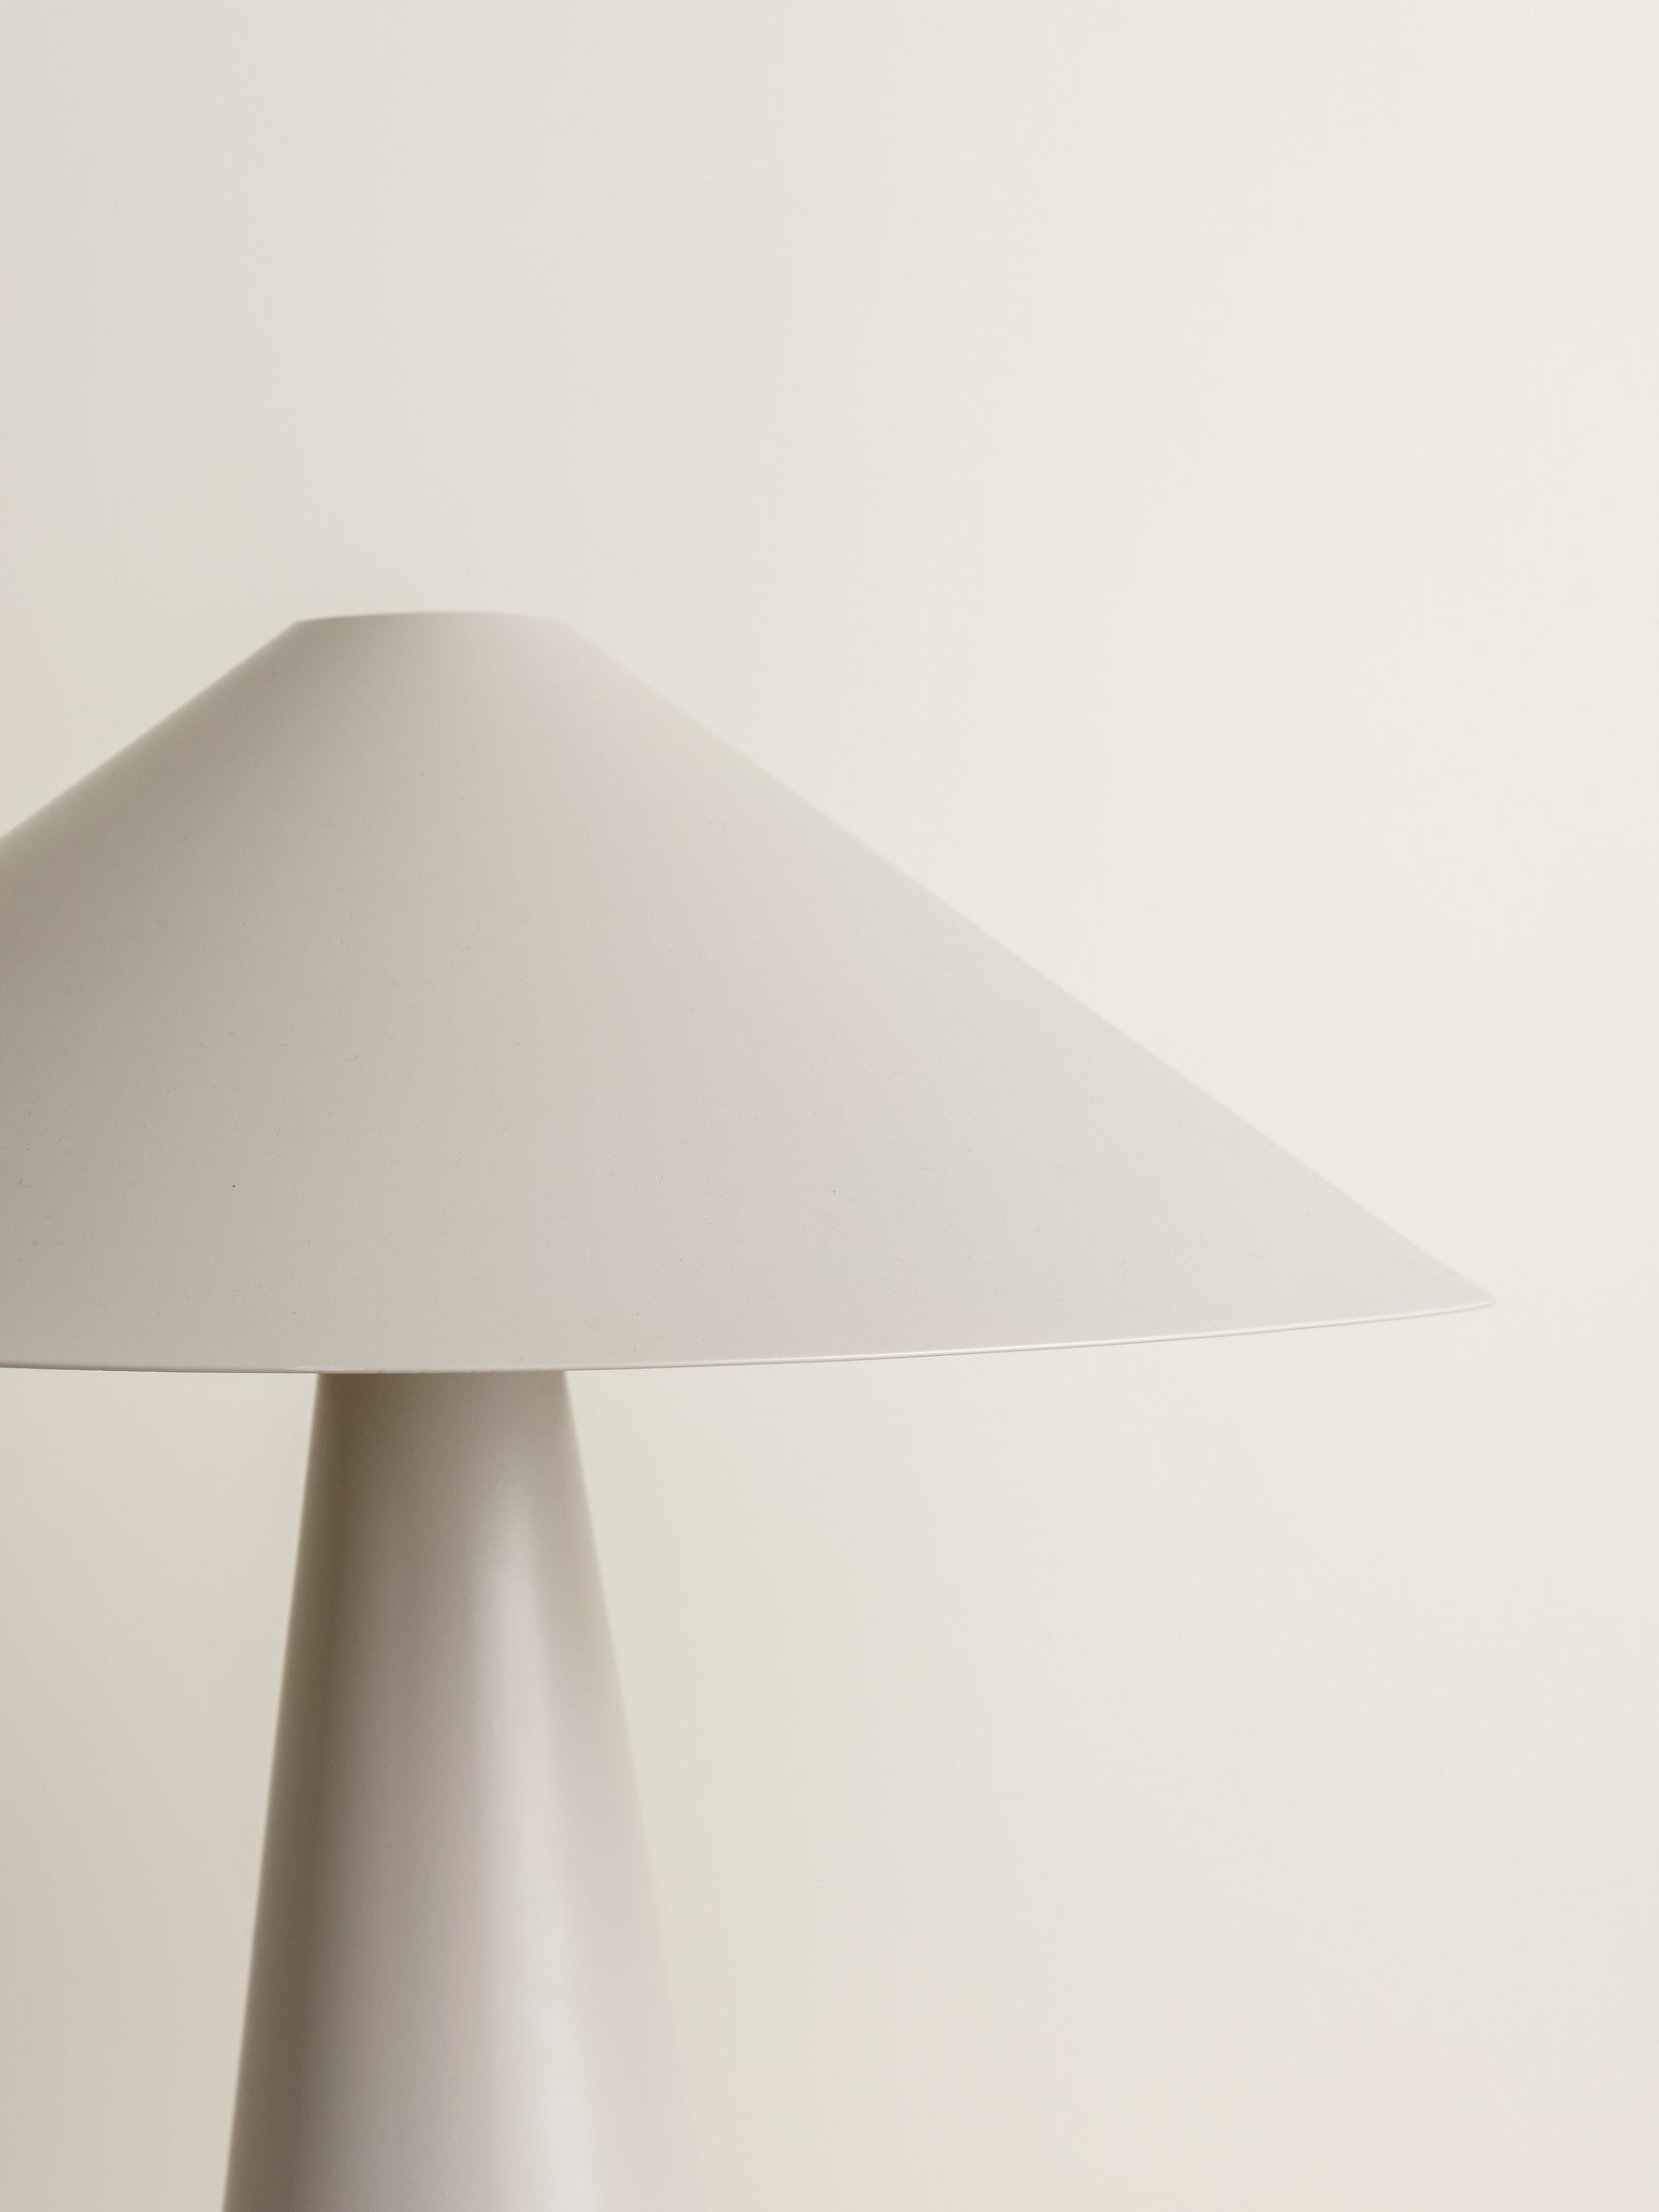 Orta - 1 light warm white cone table lamp | Table Lamp | Lights & Lamps | UK